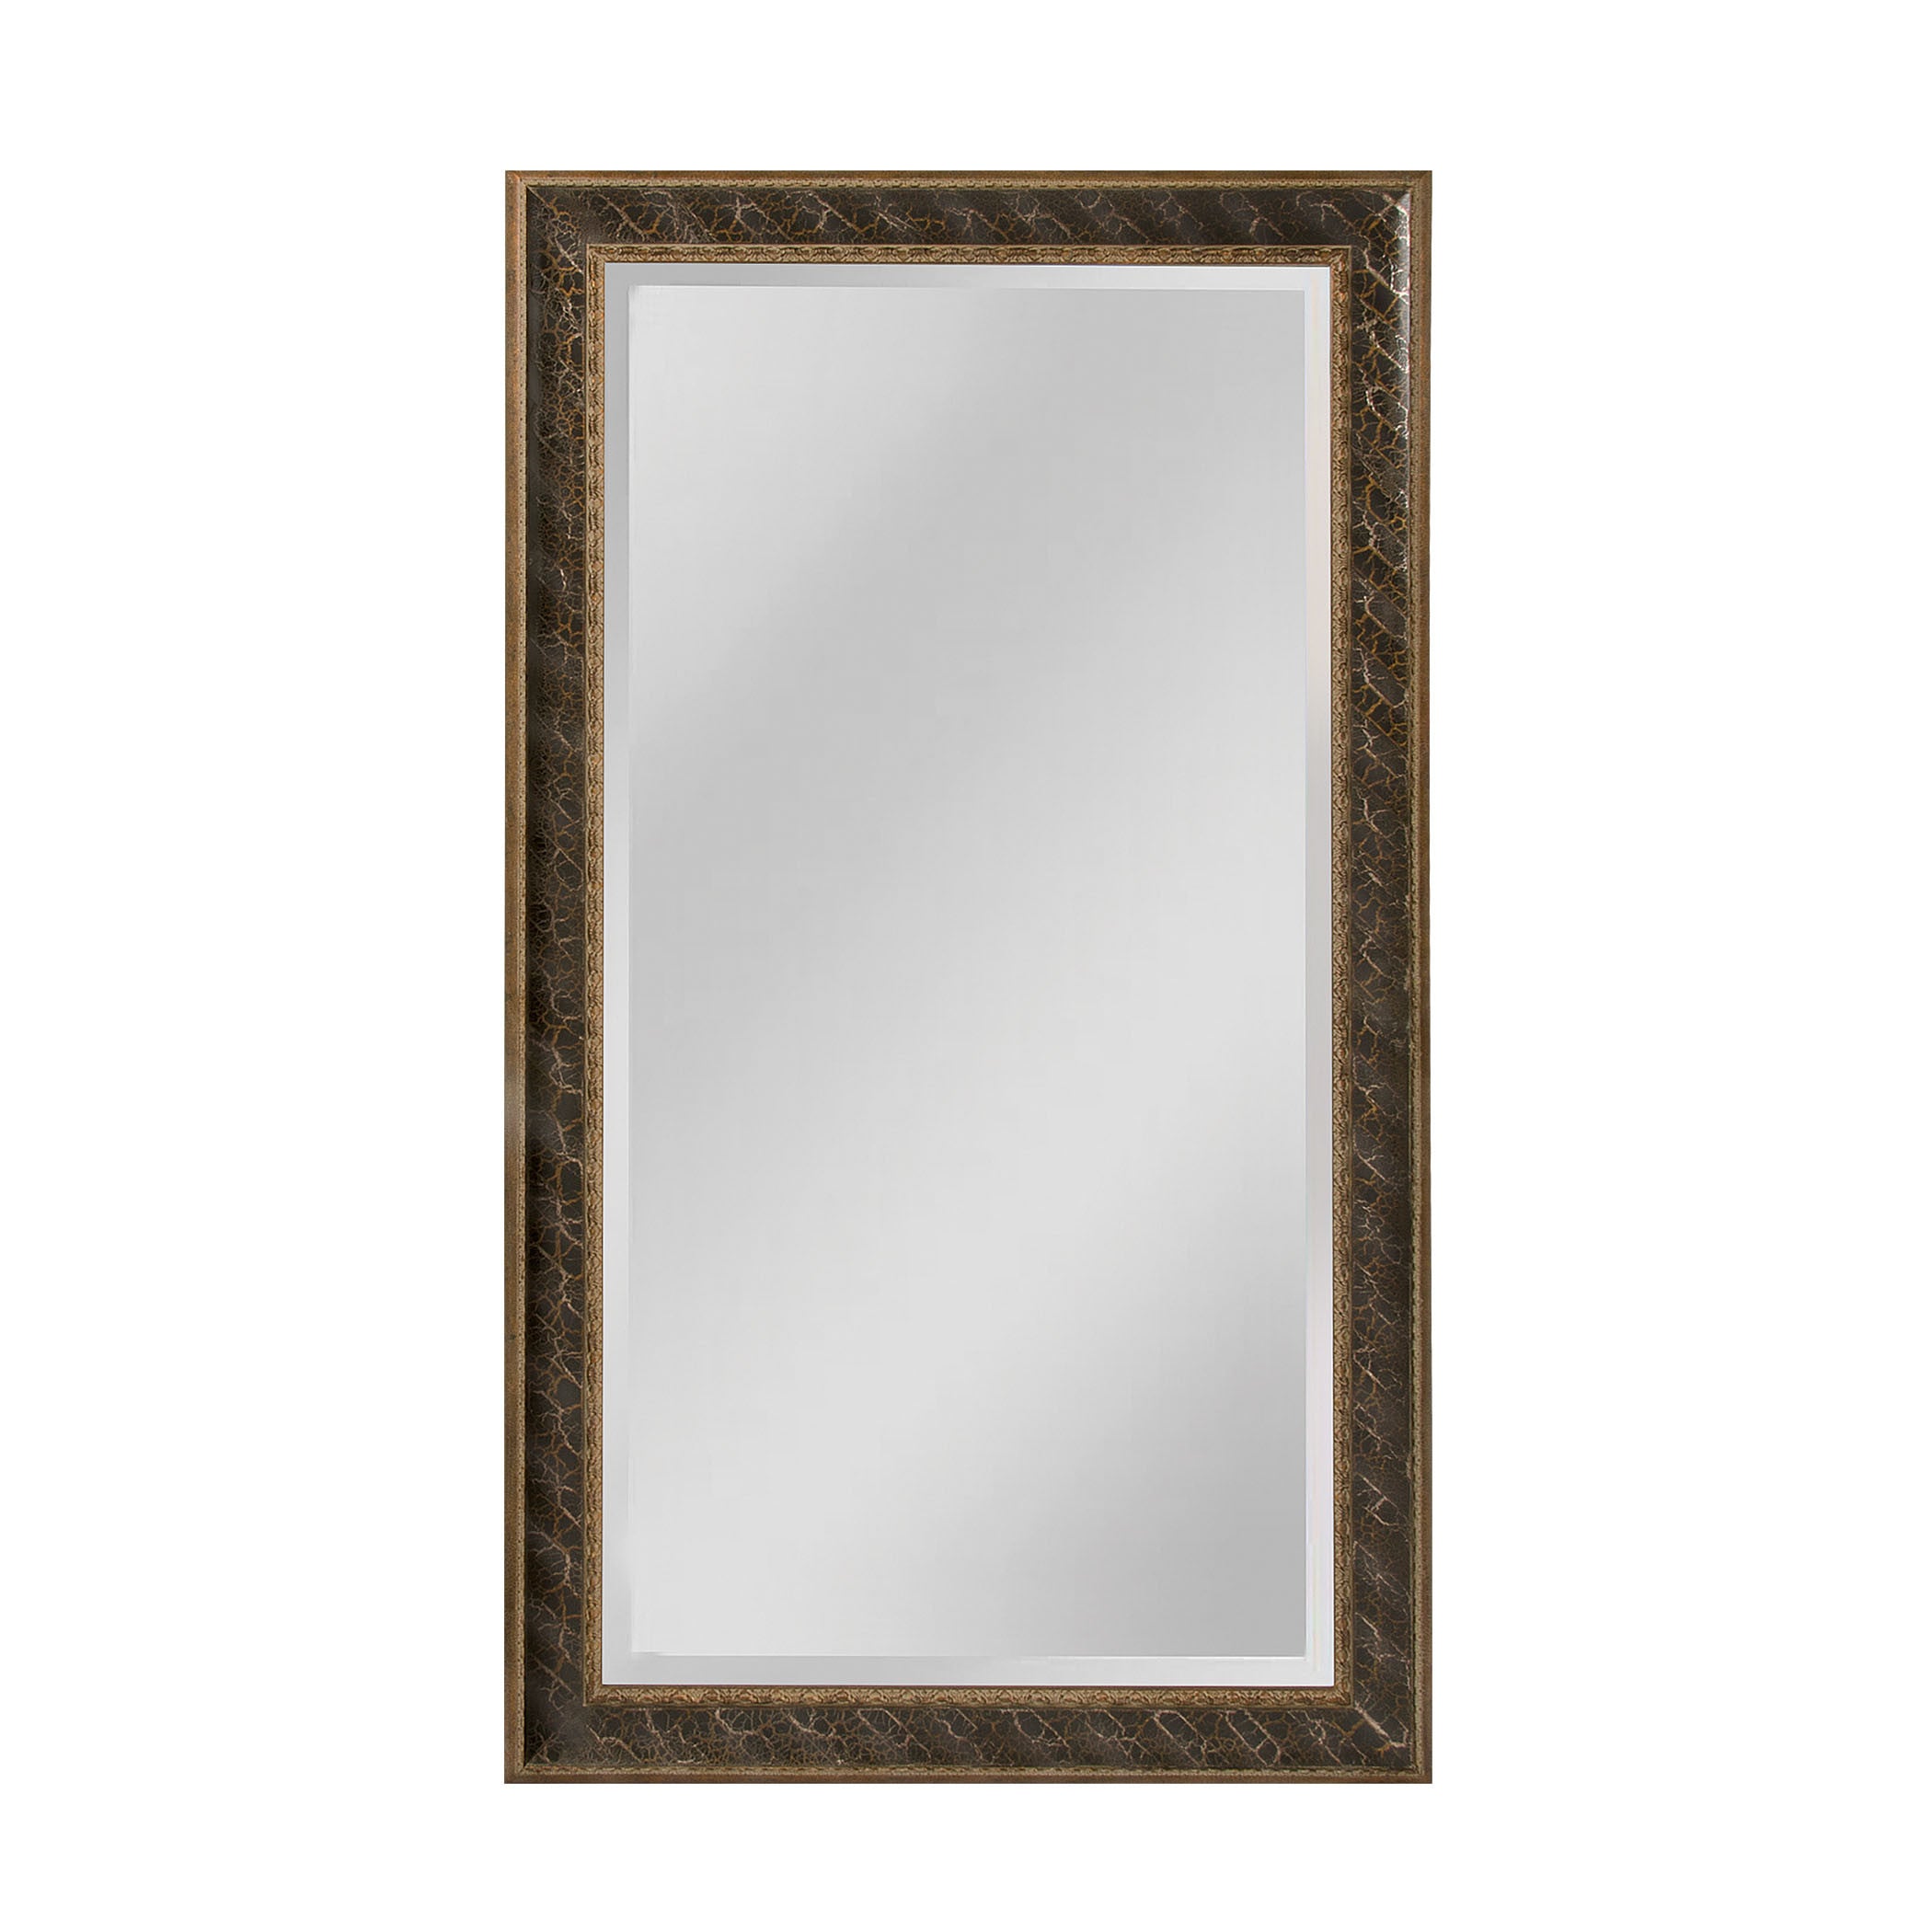 Mirror Masters Mw4024-0052 Clearfield Collection Light Antique Silver,gold,black Finish Wall Mirror